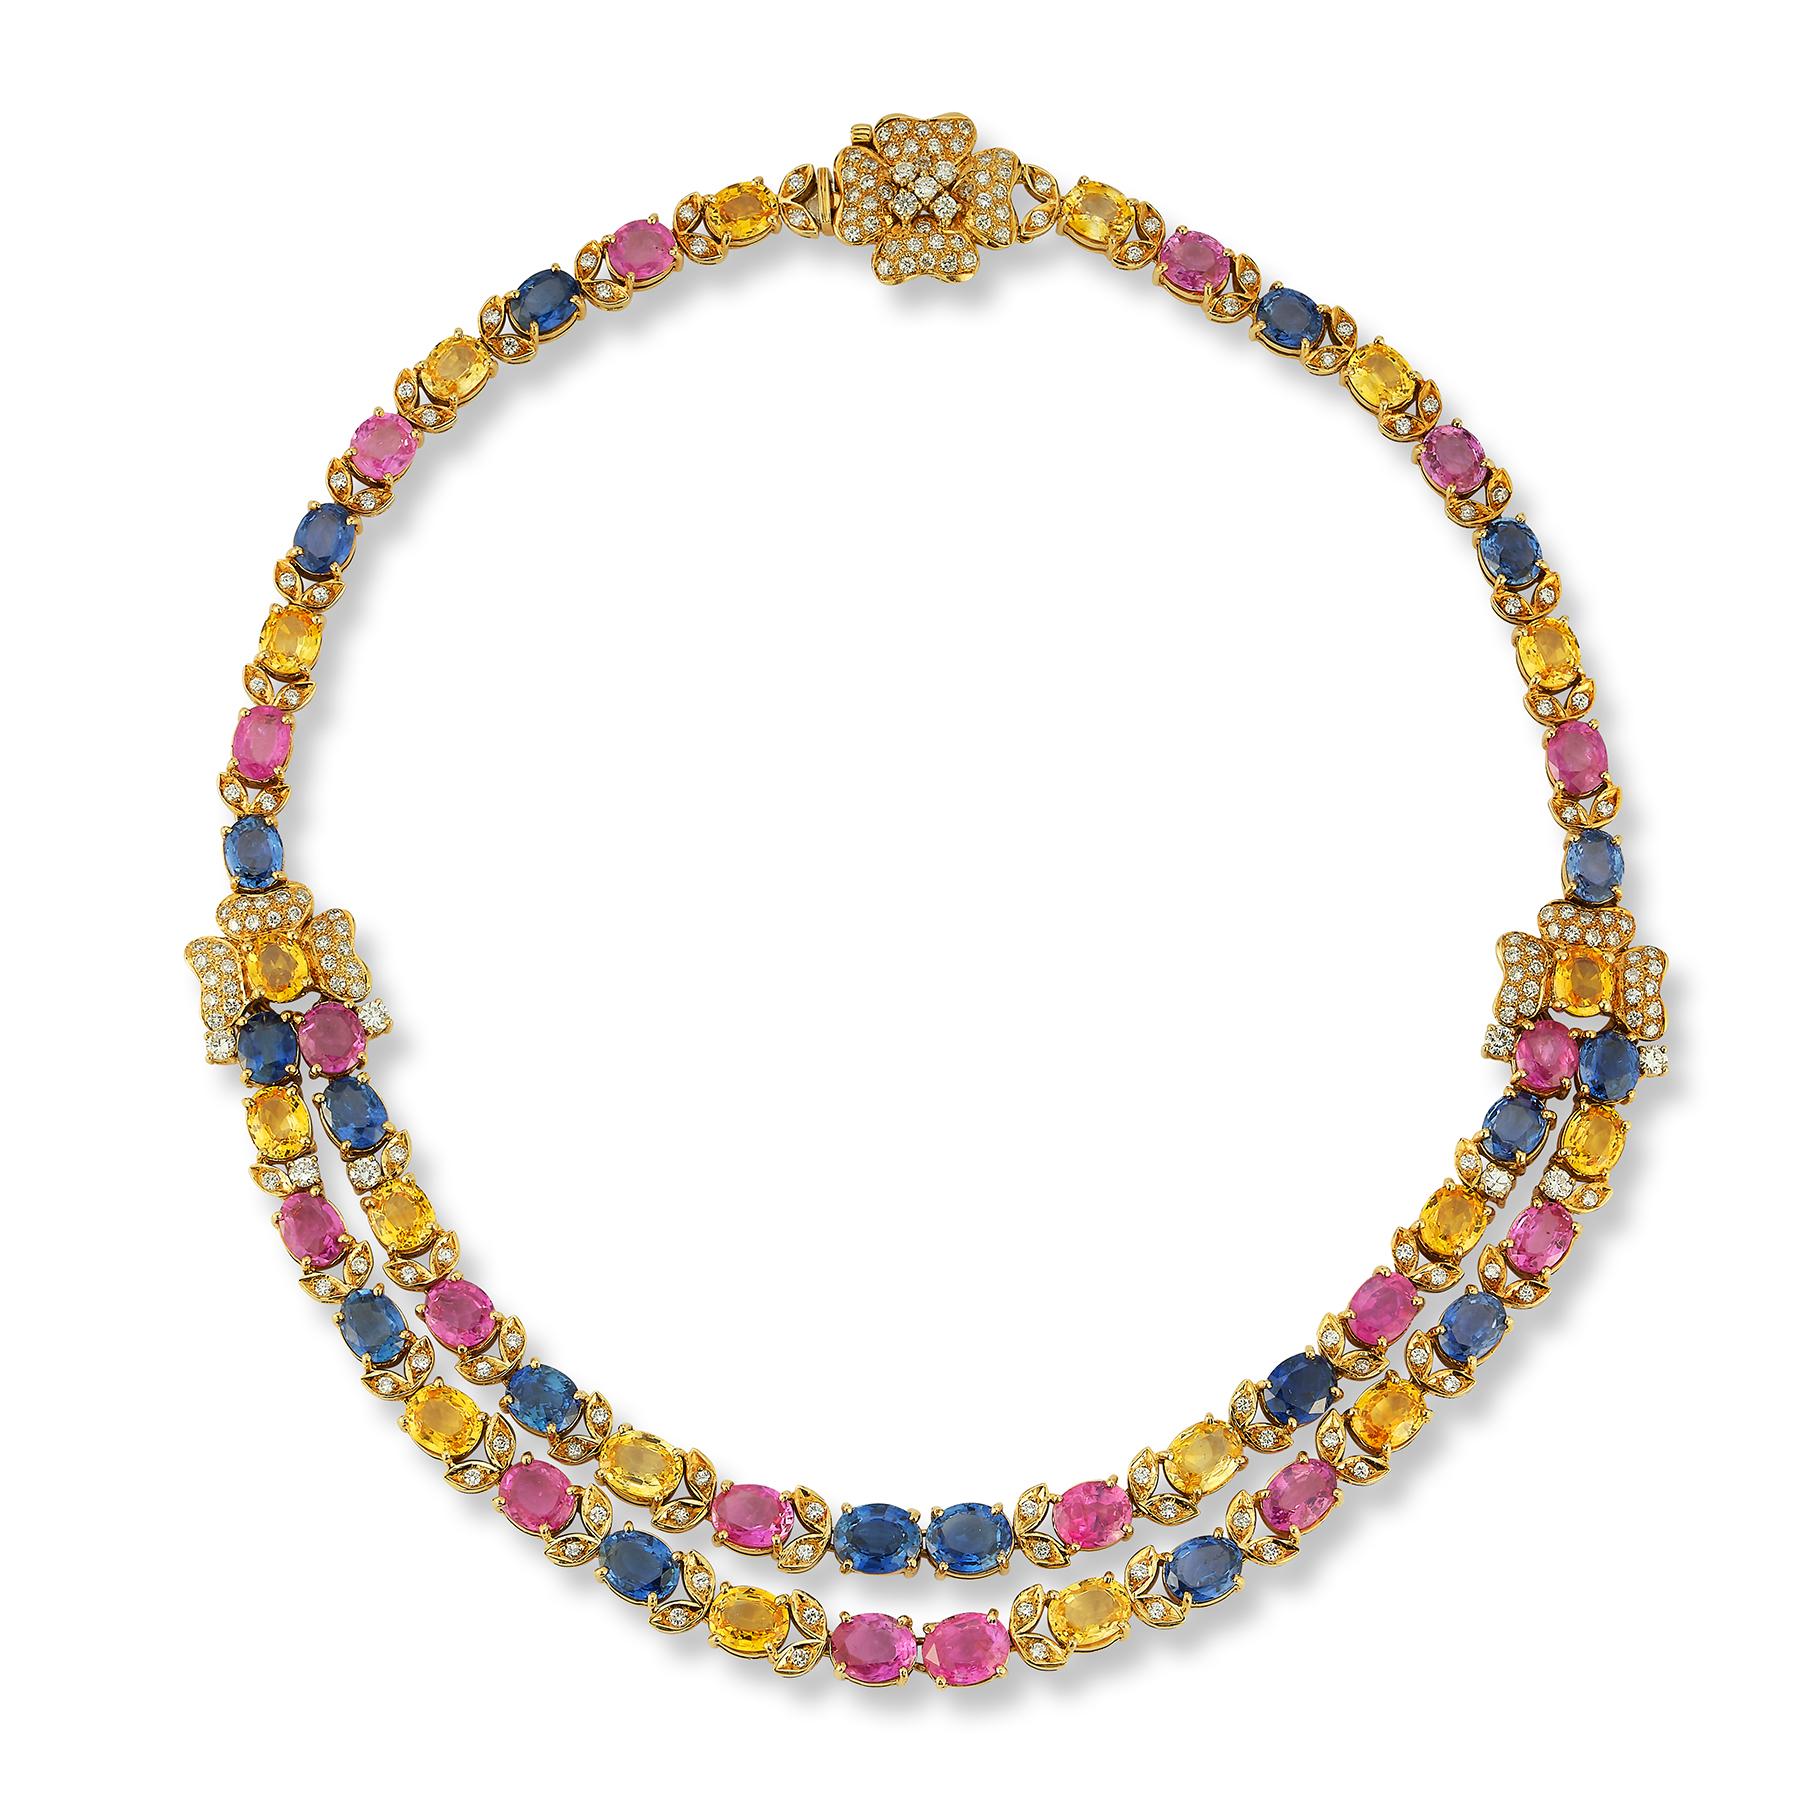 Two Row Multicolor Sapphire Necklace

18K Yellow gold foliate design neck with 310 Brilliant cut diamonds approximately 6.37 ct and 20 pink sapphires approximately 29.7 ct and 20 oval blue sapphires approximately 25.65 ct and 30 oval yellow